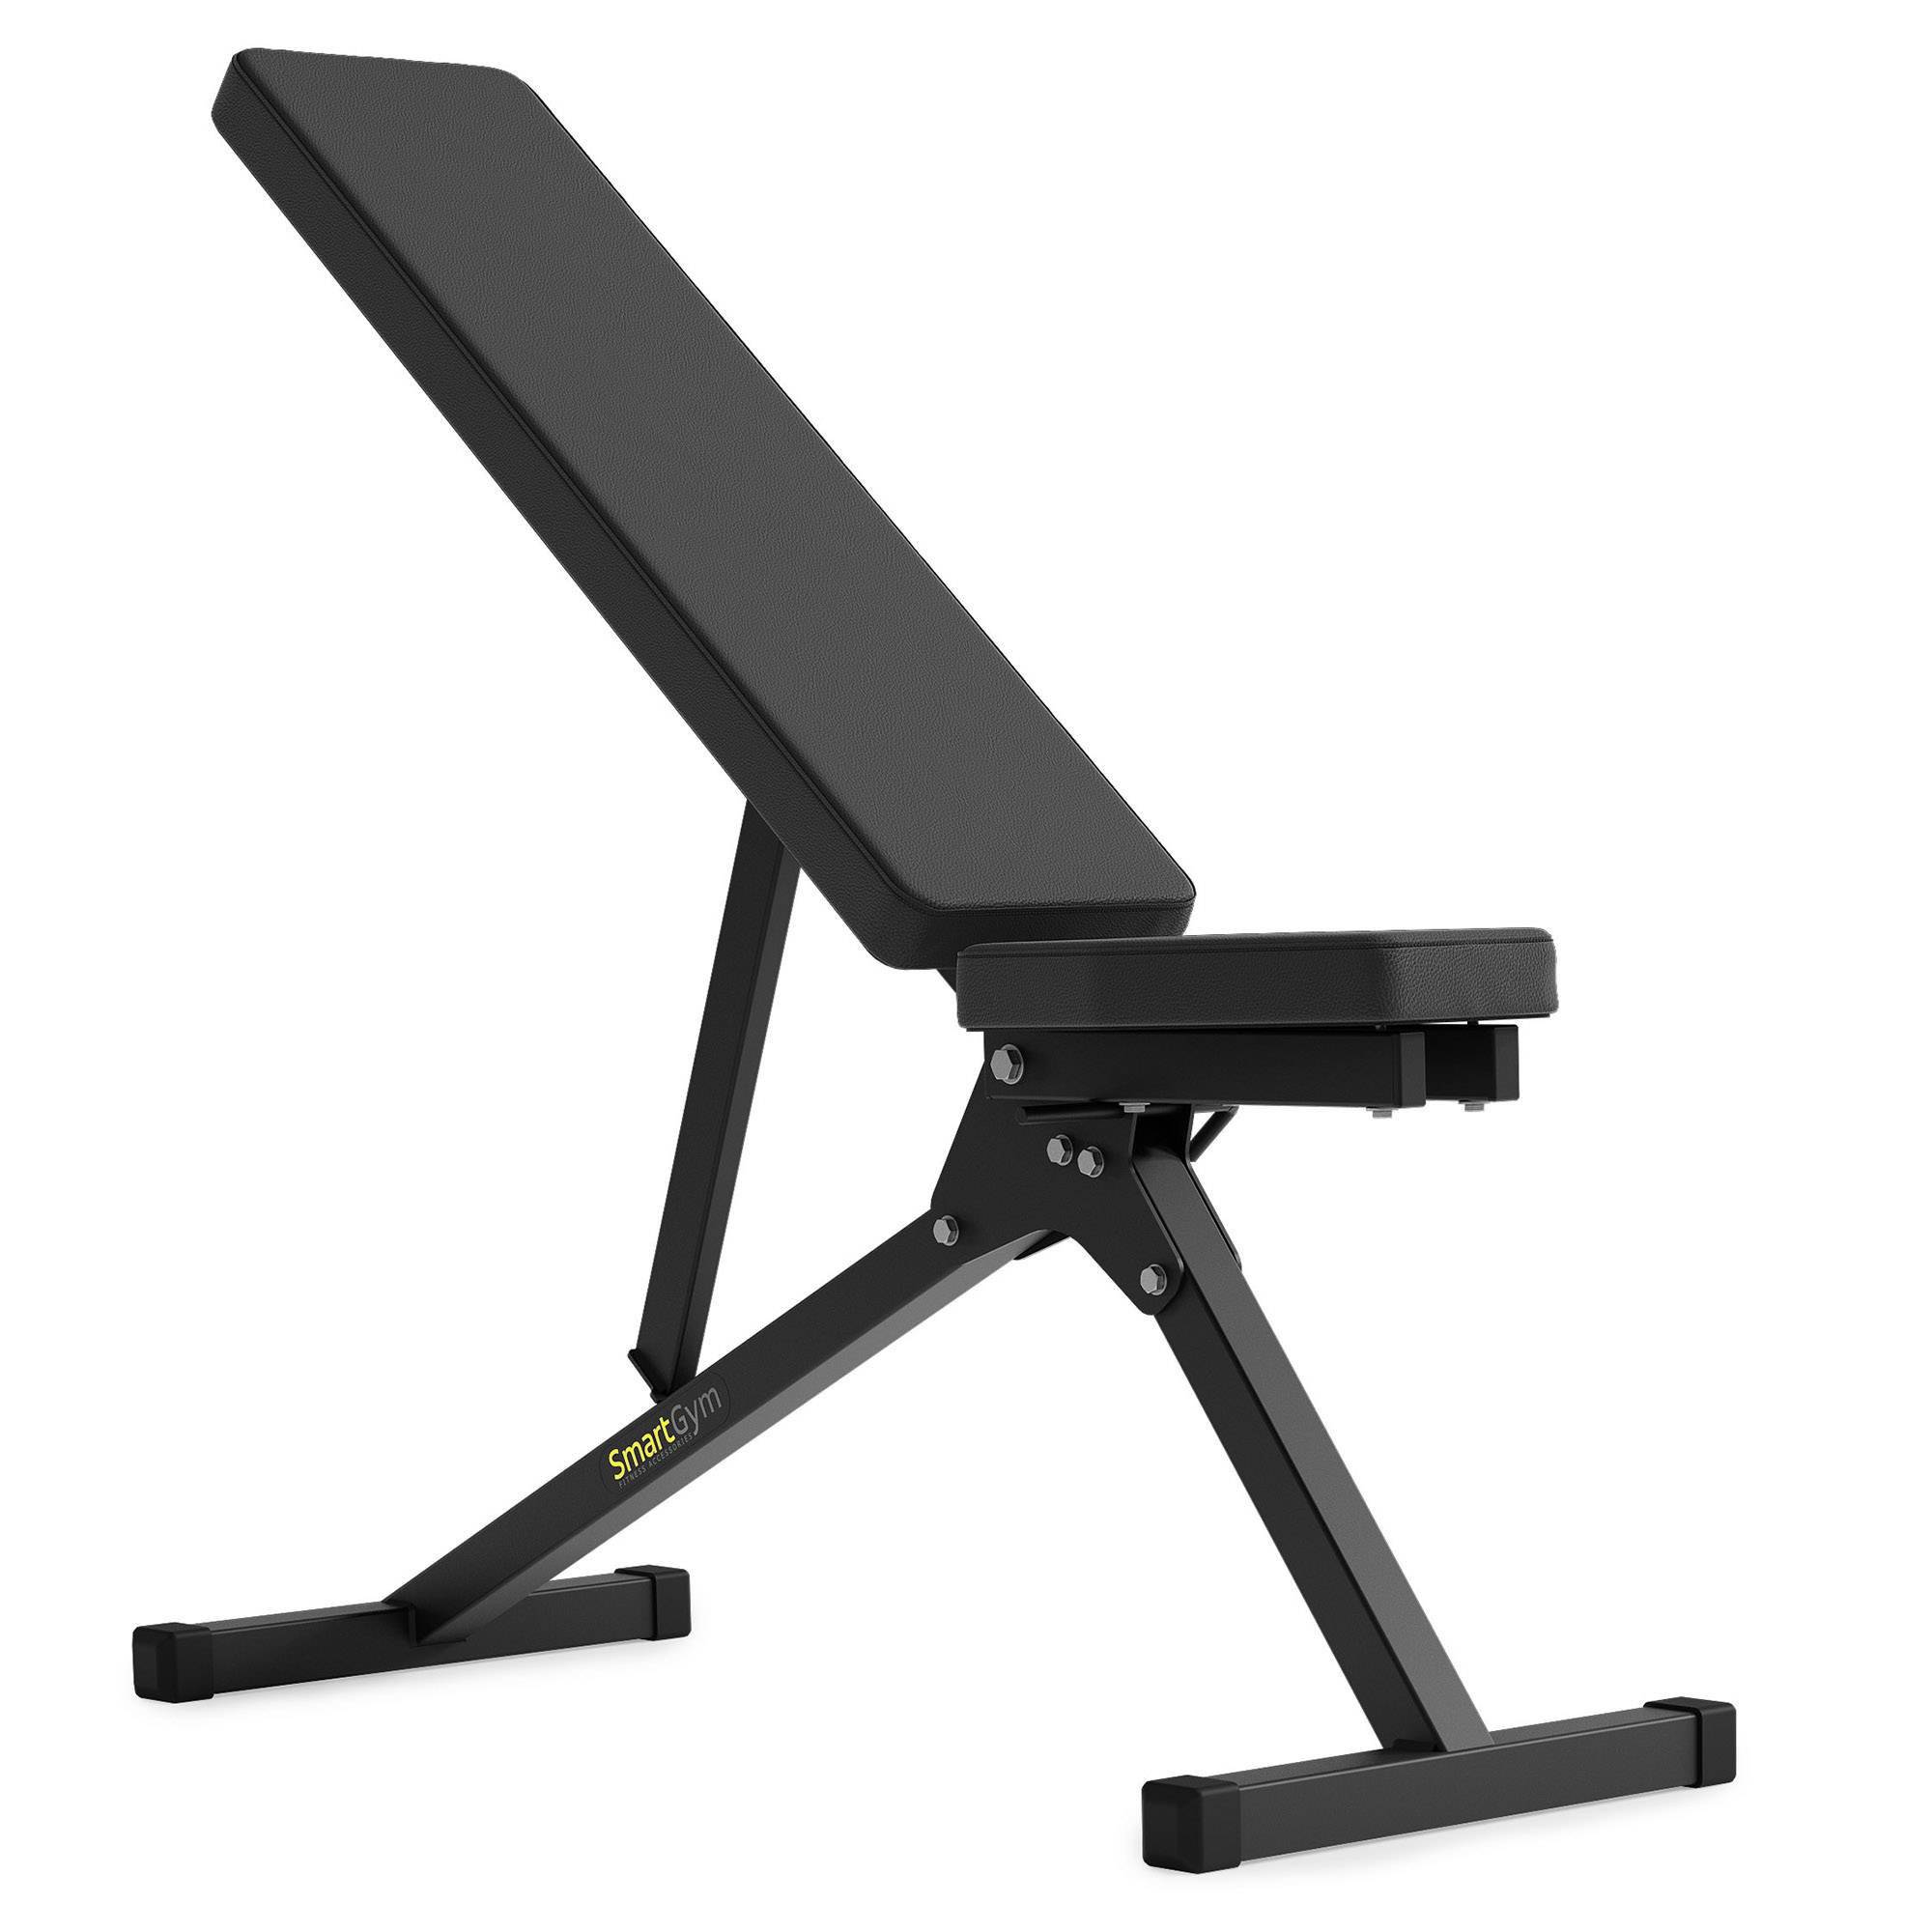 Adjustable bench \\ Strength equipment - | benches SG-11 \\ Accessories Benches Training SmartGym Fitness